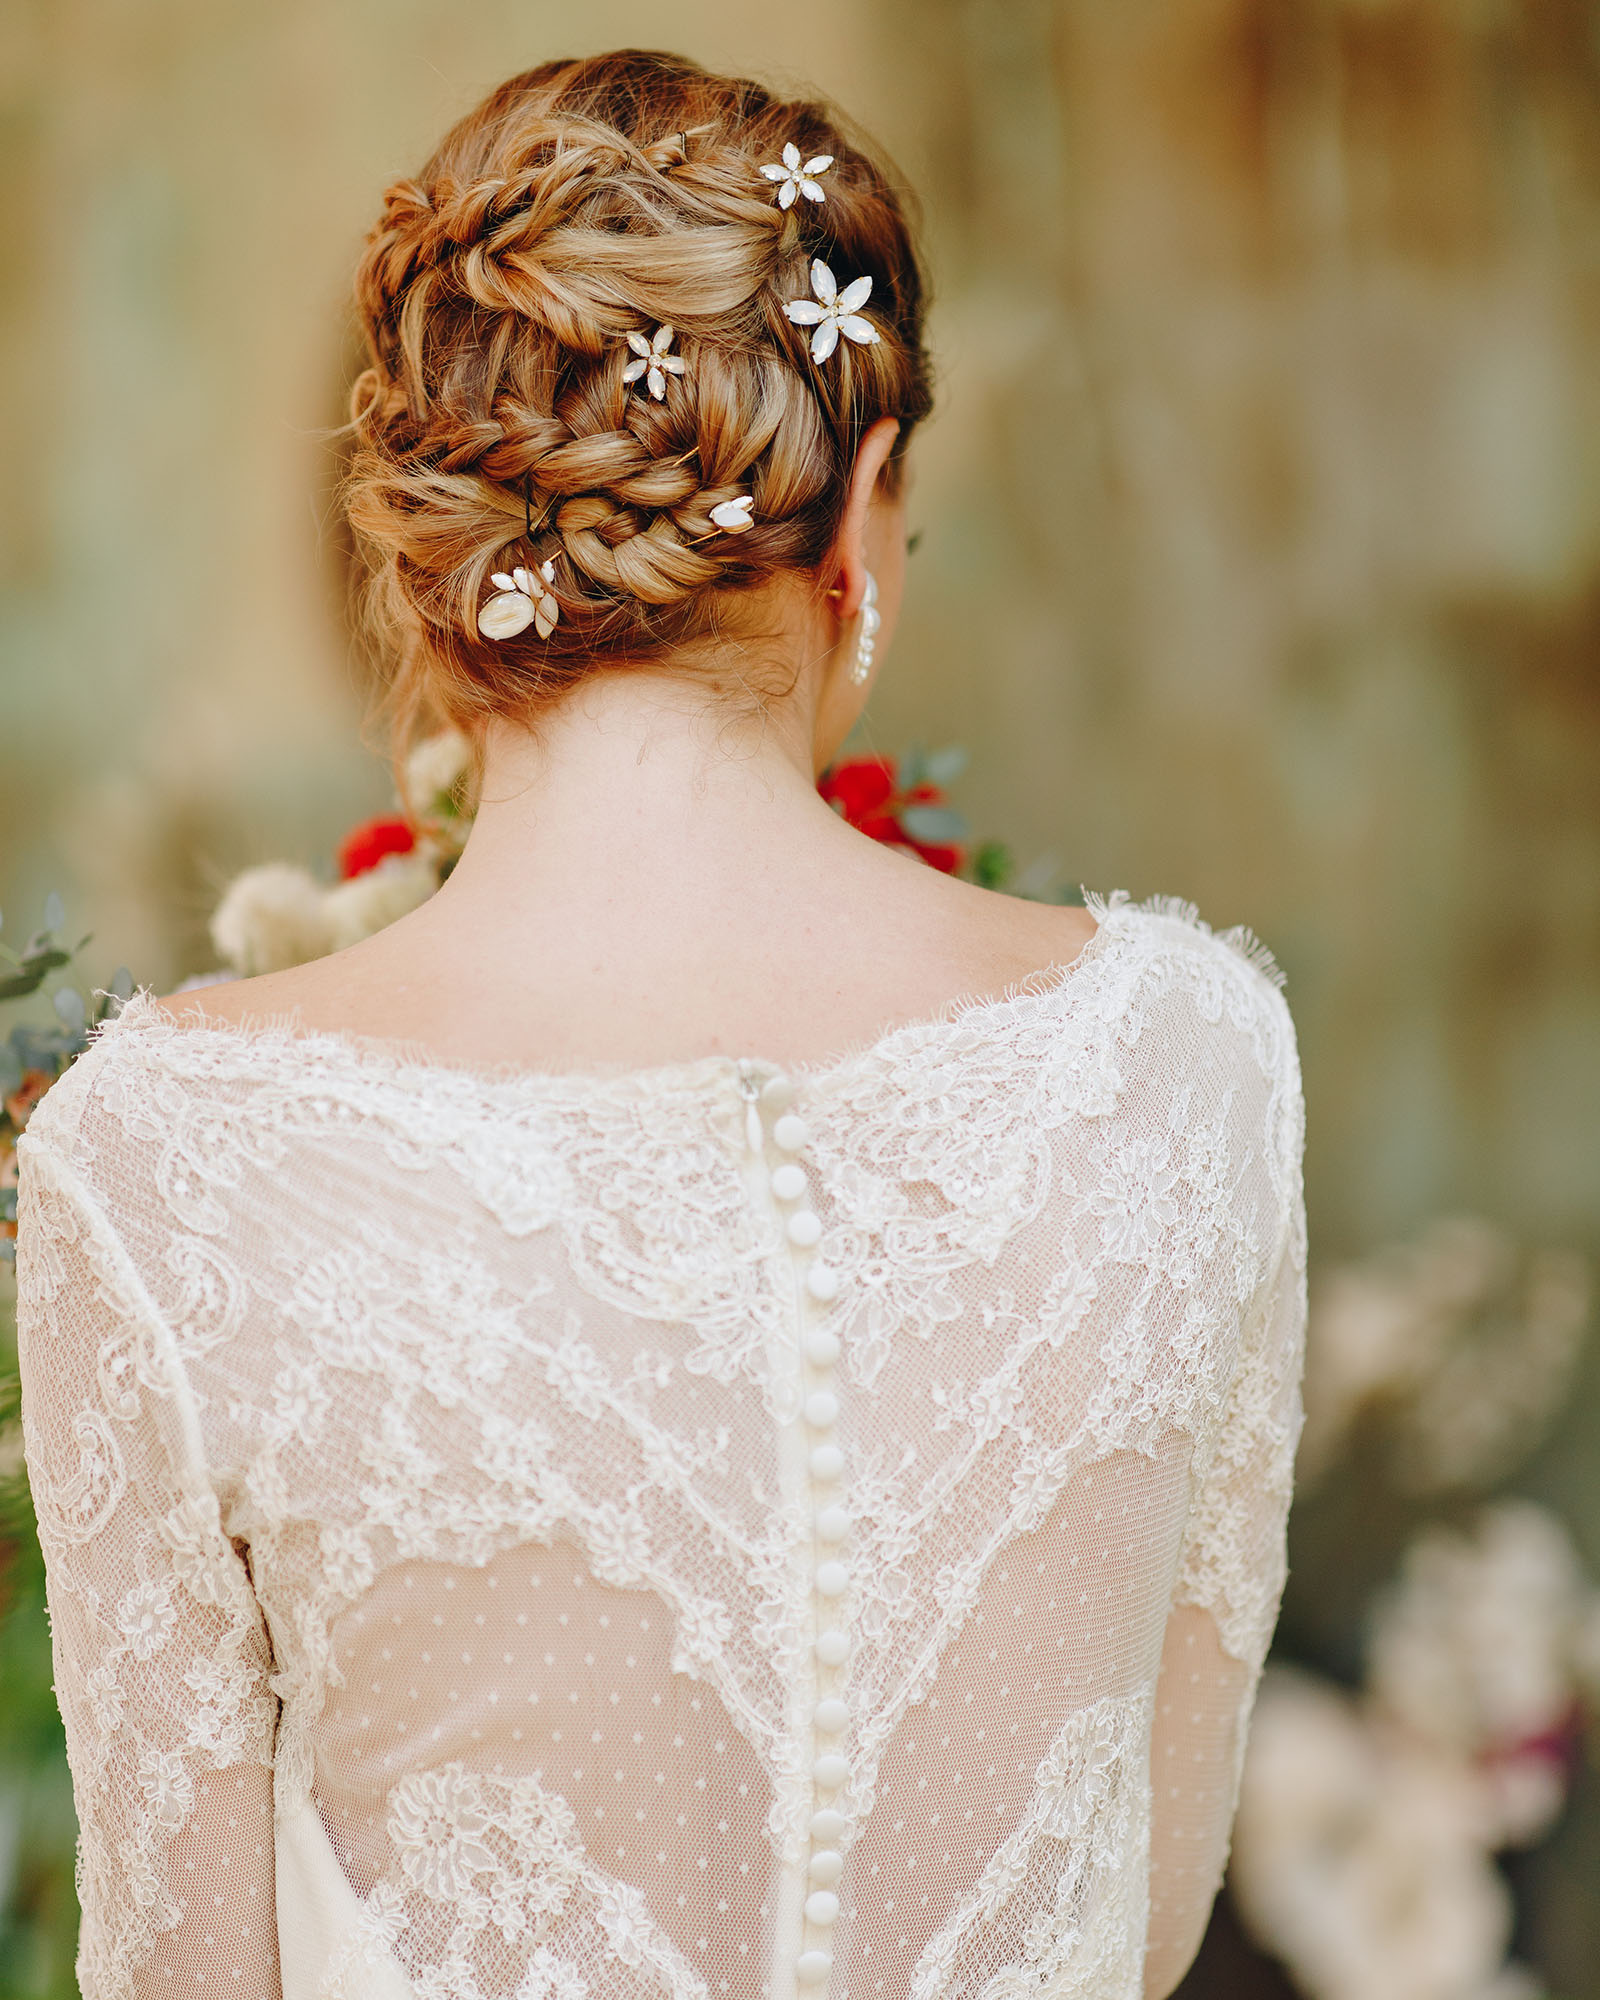 Bridal Accessories from Hushed Commotion